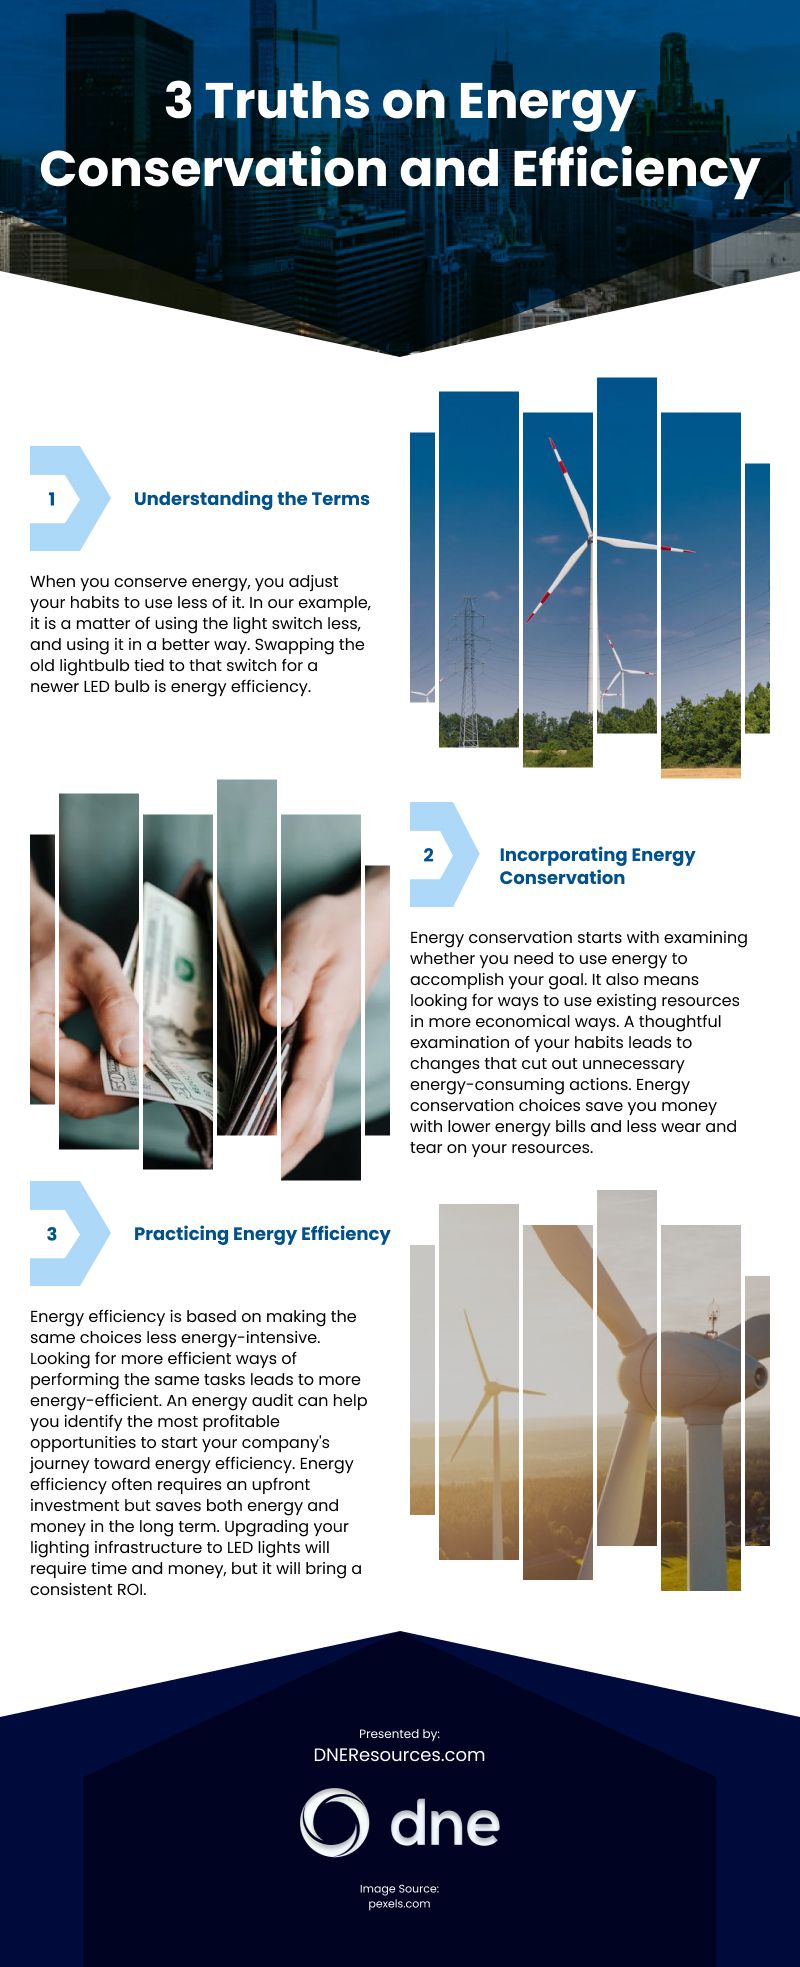 3 Truths on Energy Conservation and Efficiency Infographic